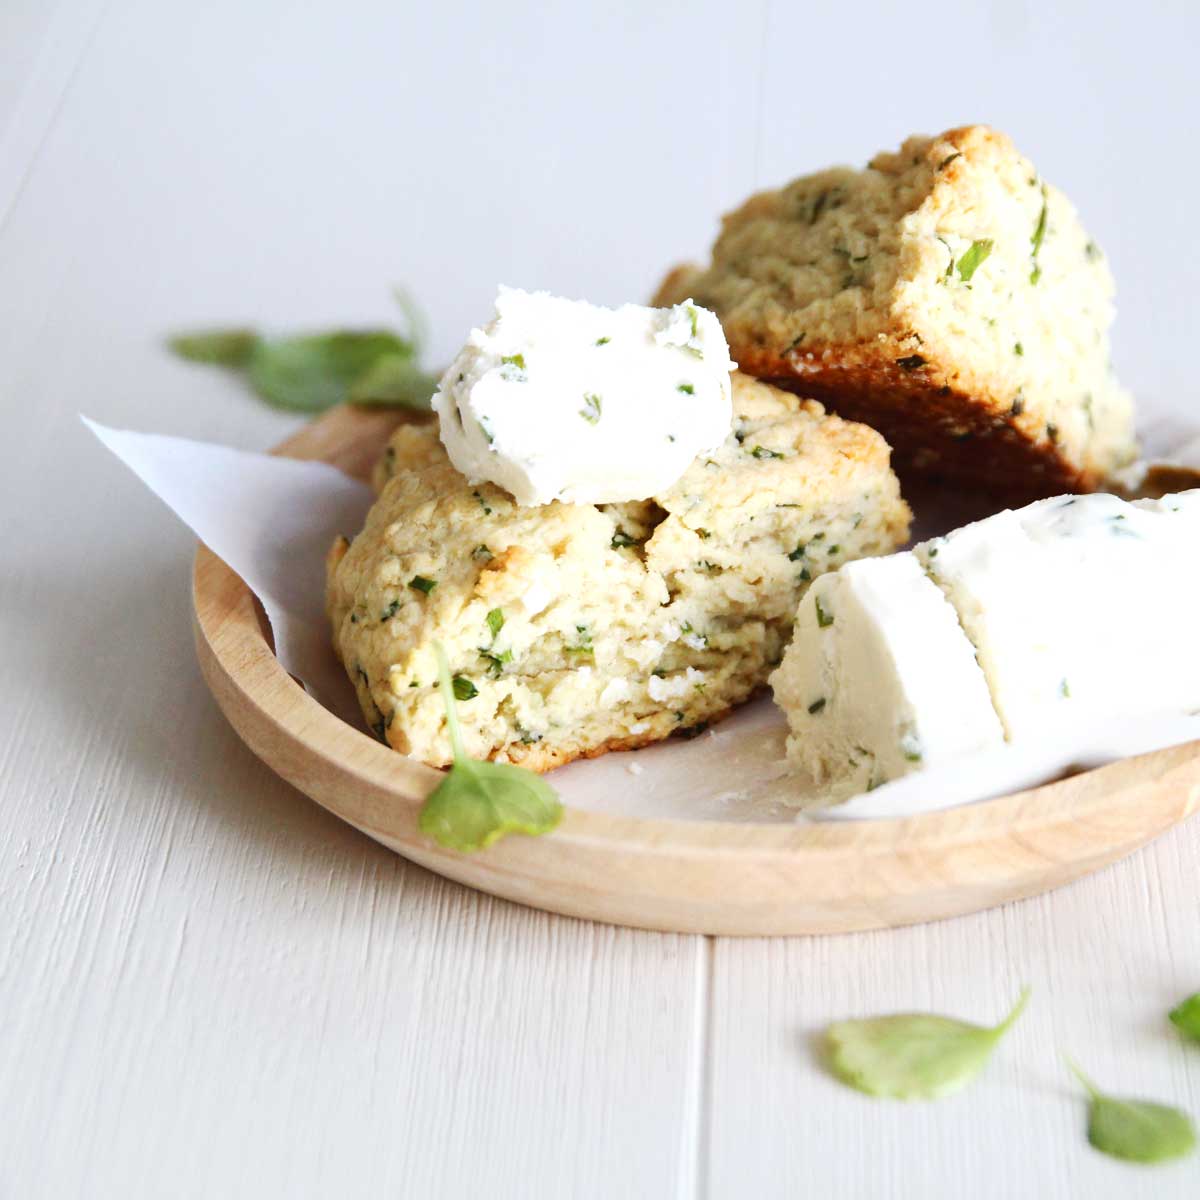 Savory and Delicious: Potato & Chives Scones - served with flavored vegan butter
